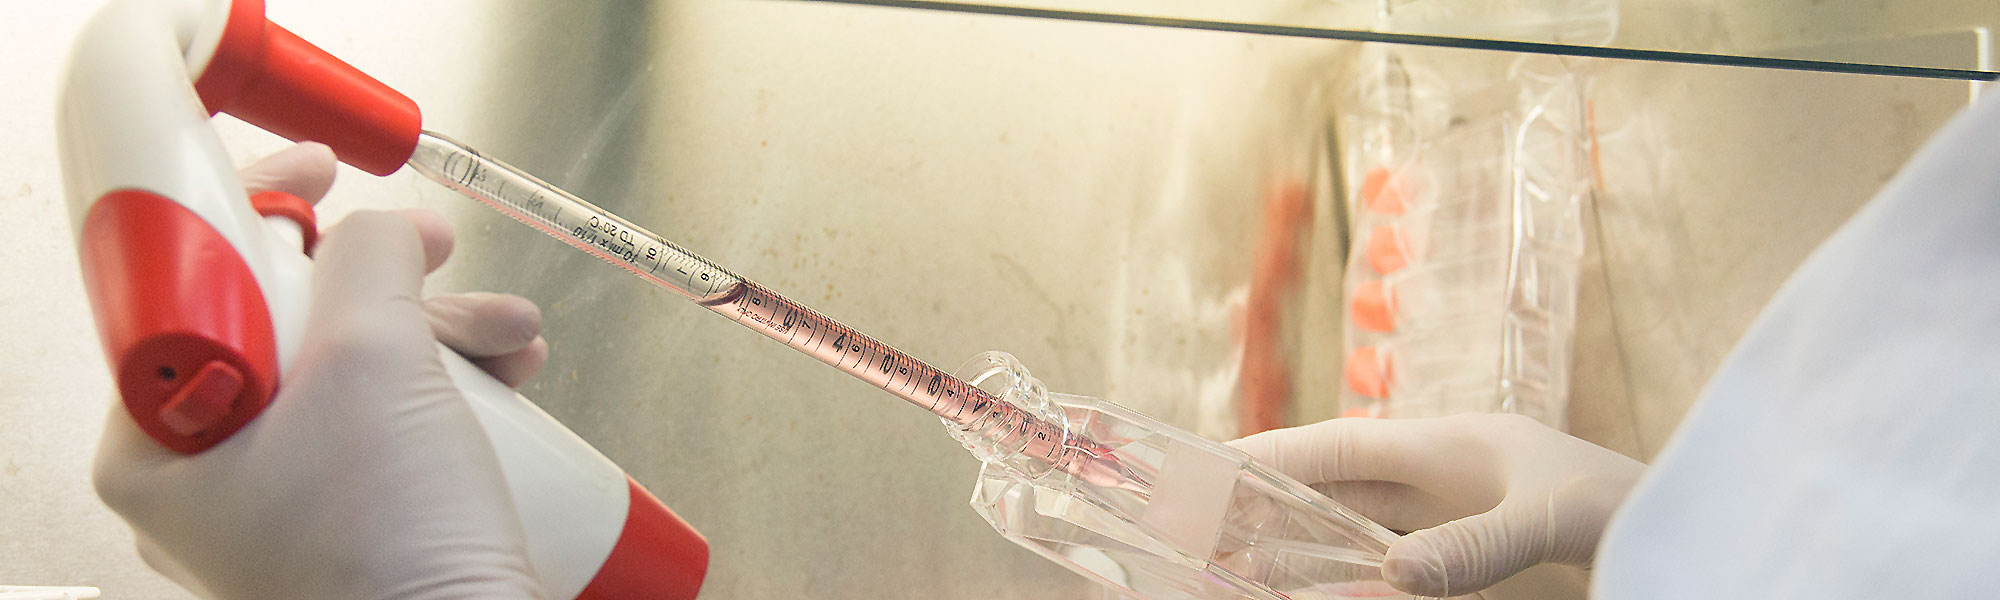 Extracting a liquid using a large pipette